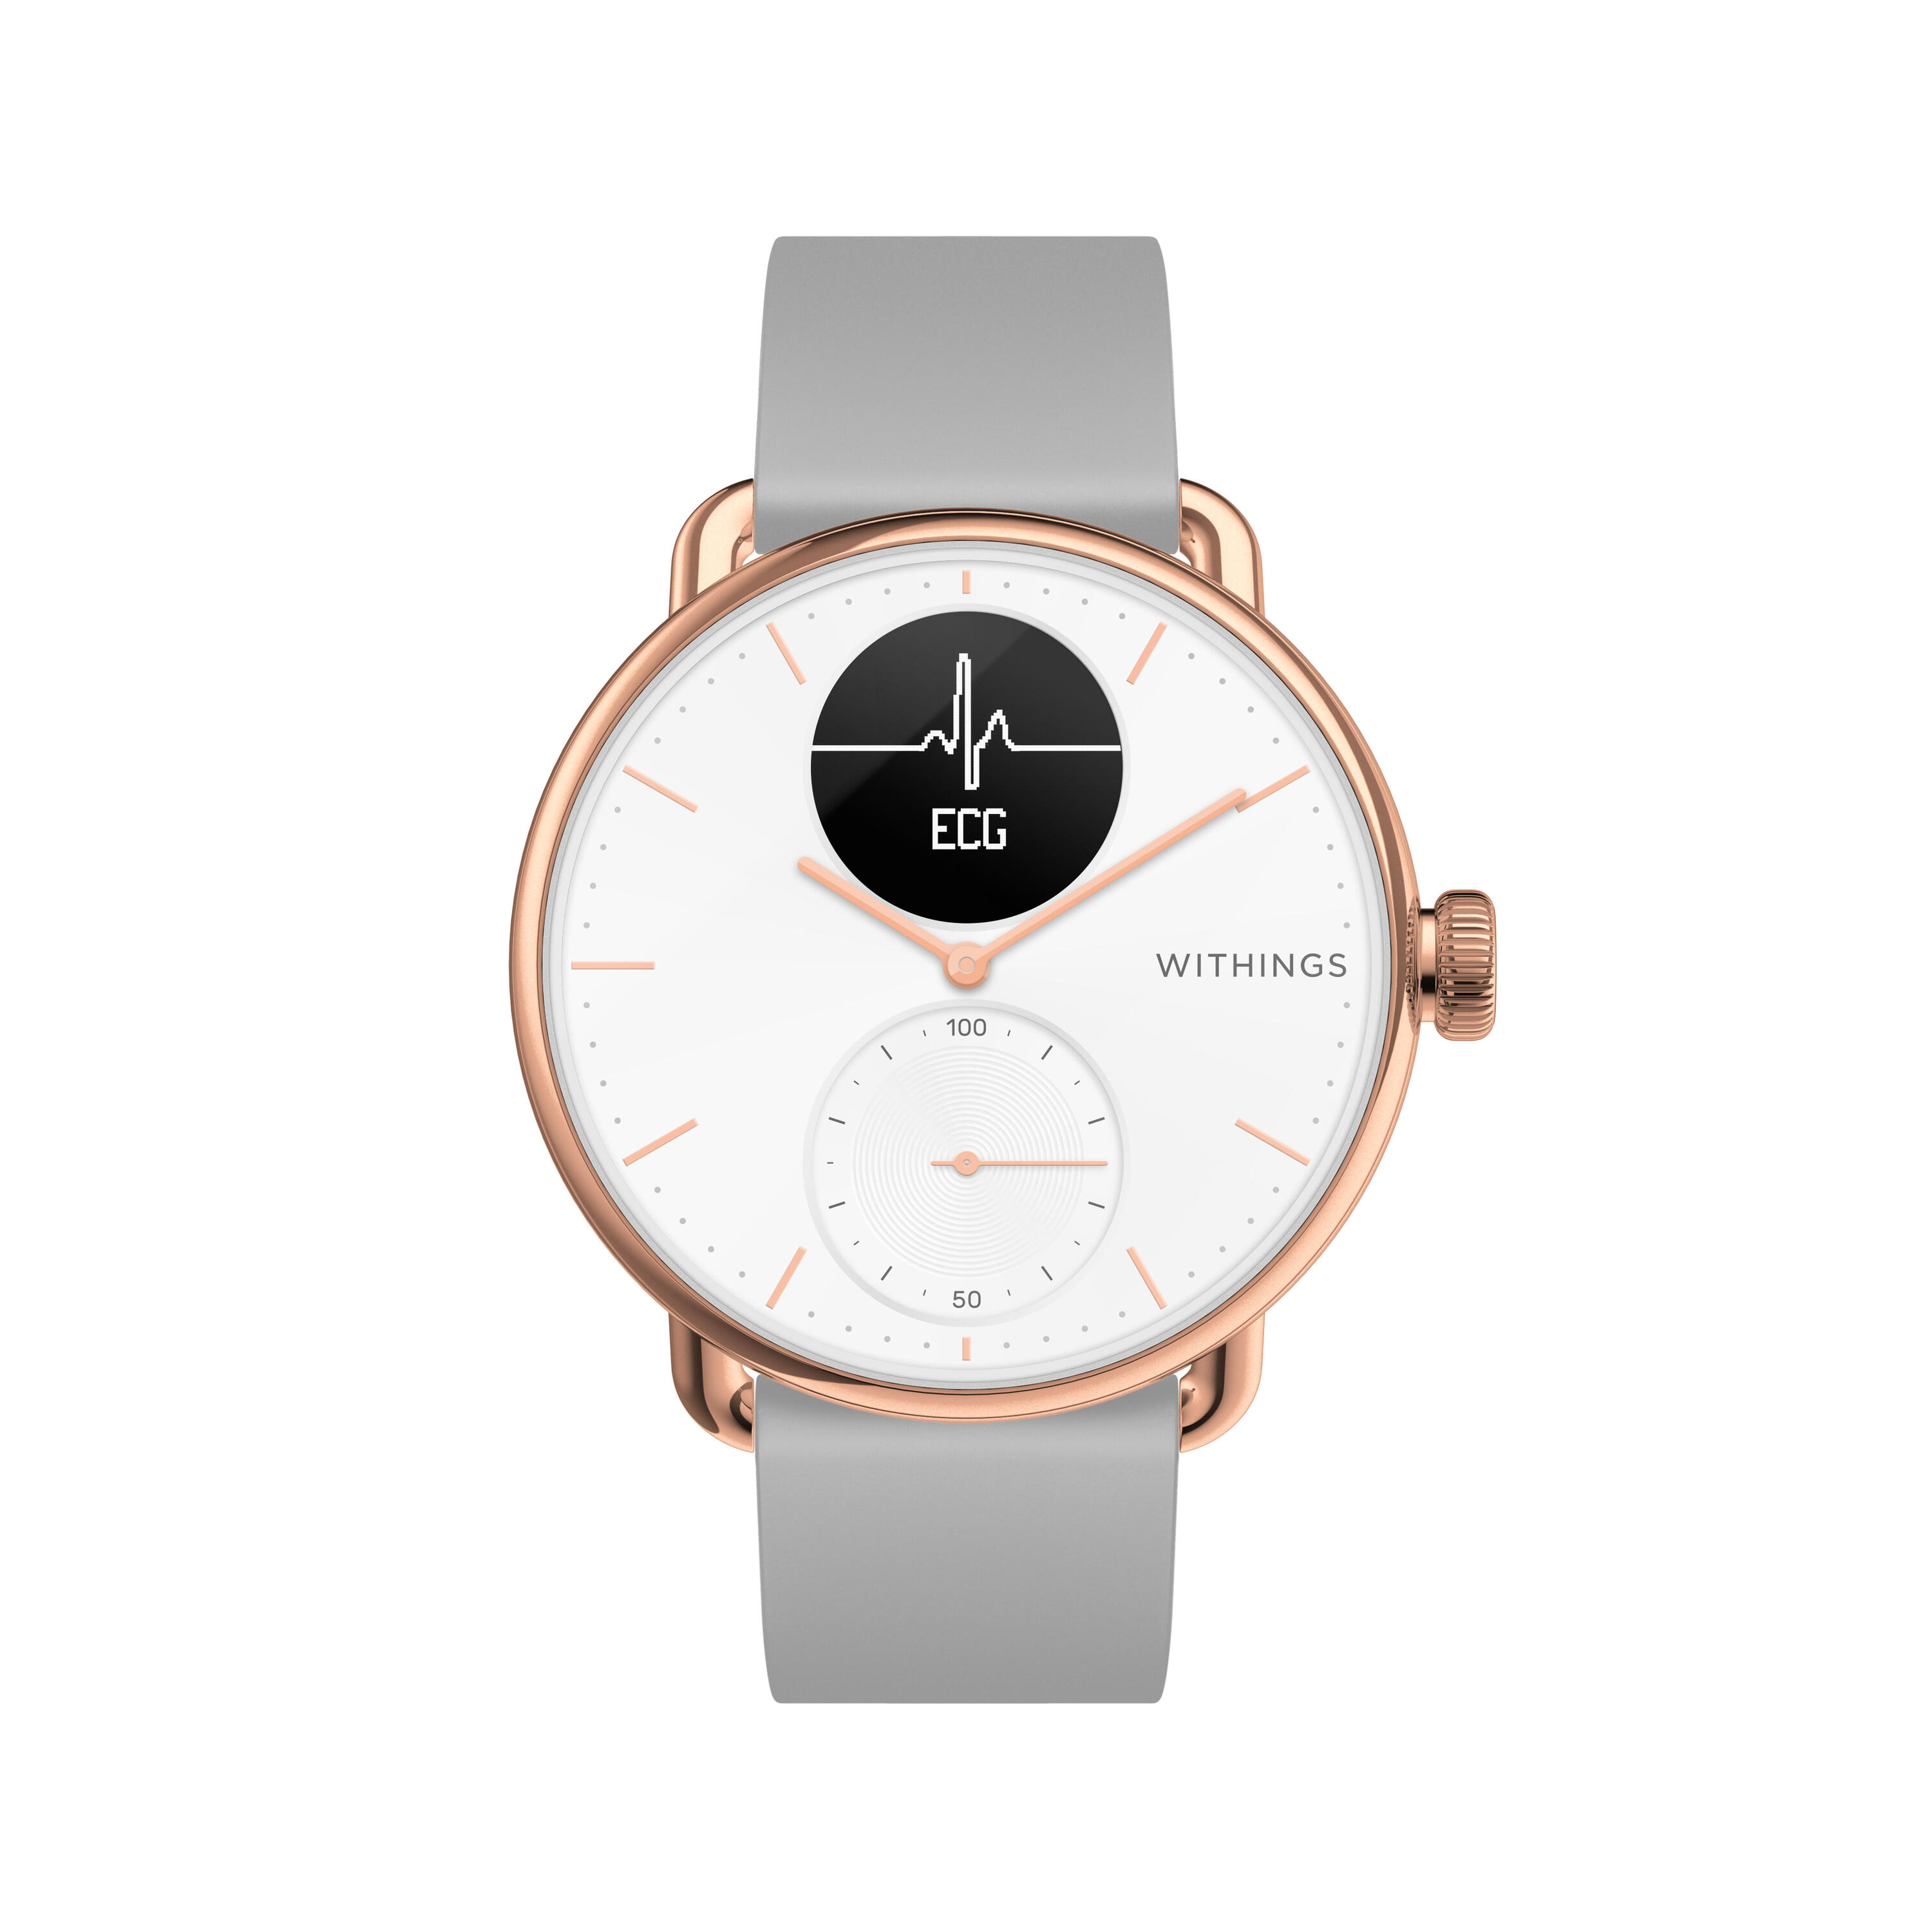 WITHINGS ScanWatch Withings GPS smartwatch - rose gold